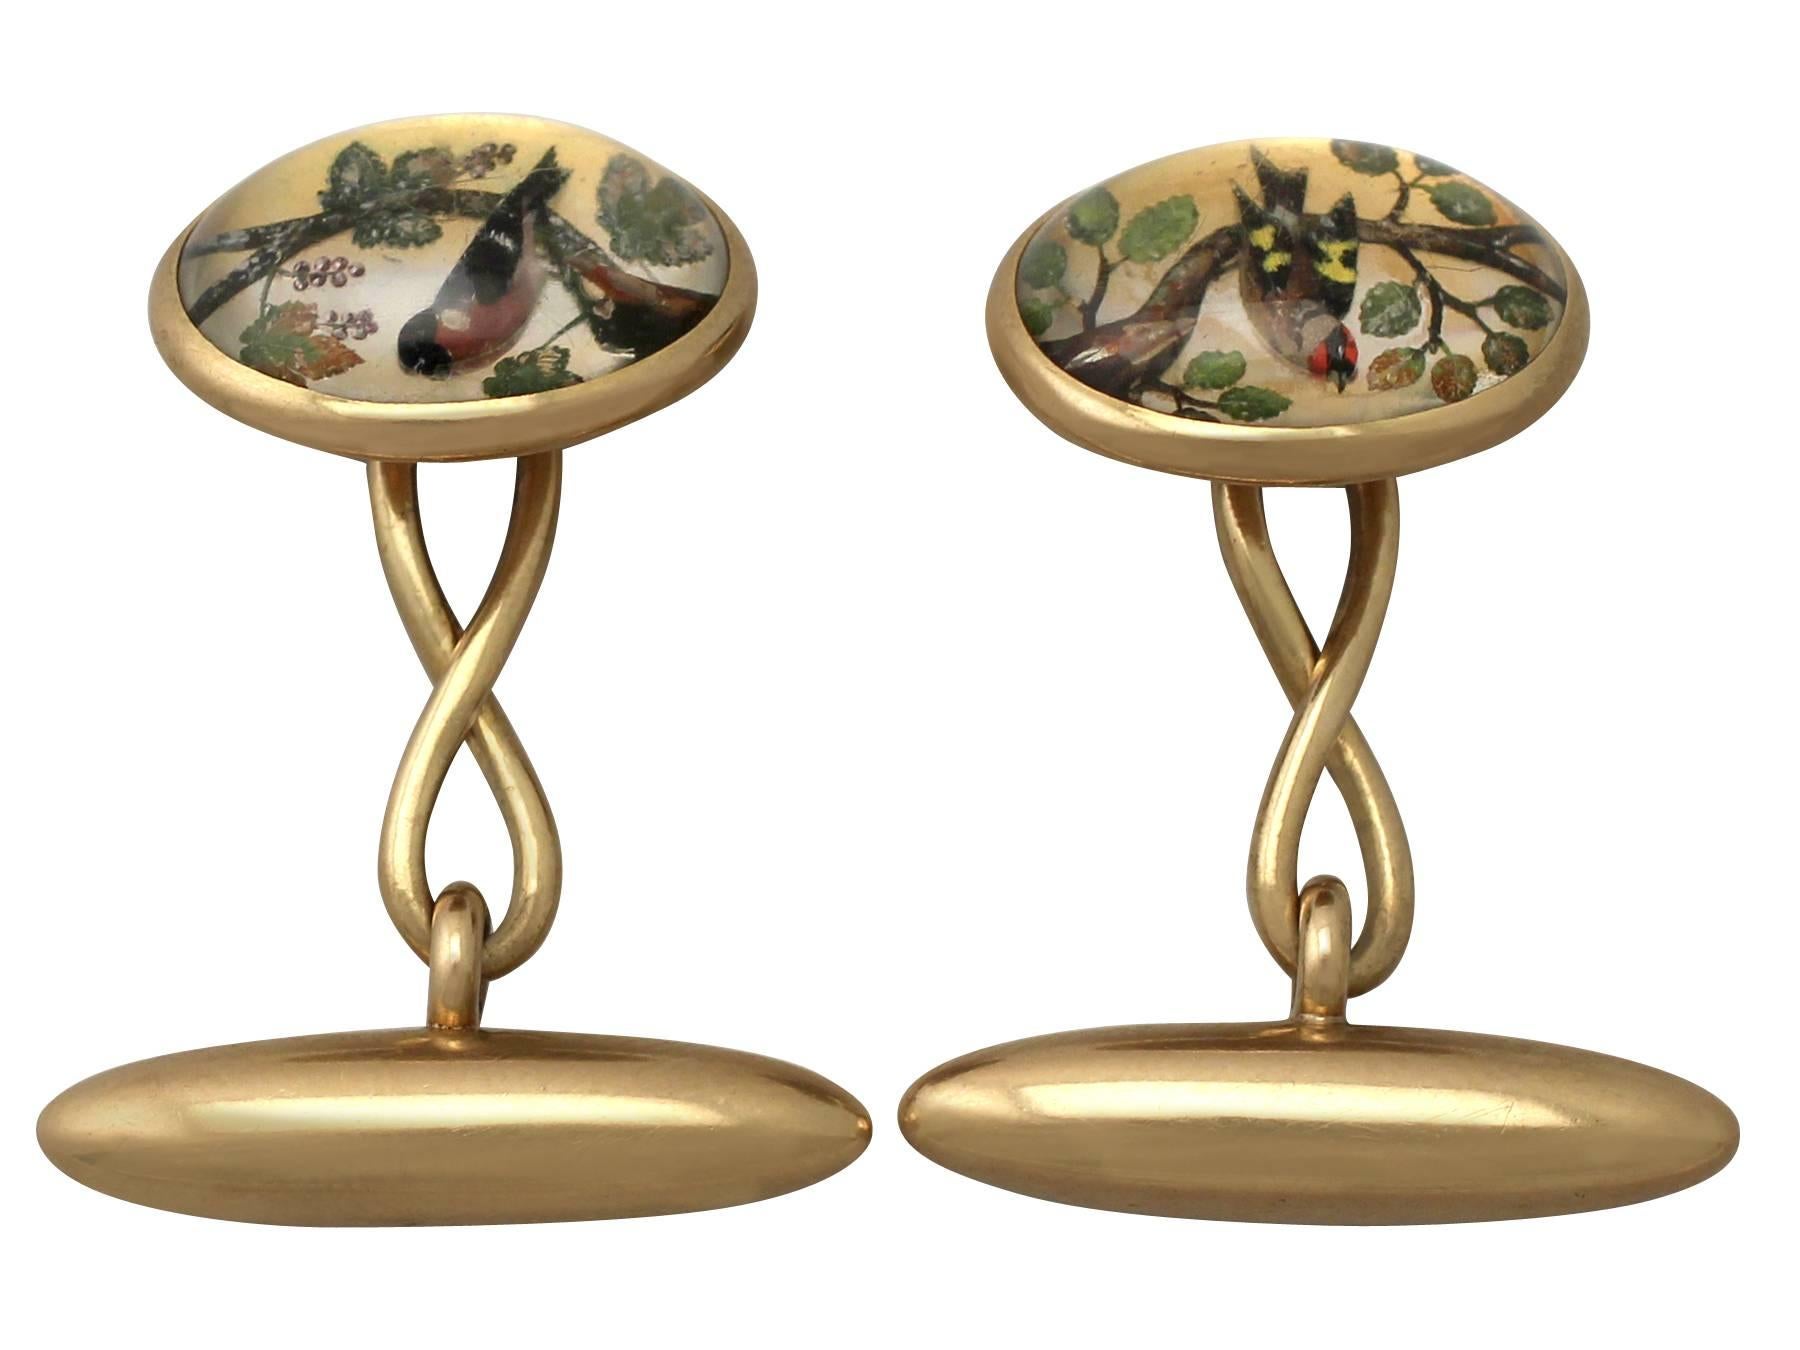 A Stunning pair of Essex crystal and 18 carat yellow gold cufflinks depicting a gold finch and a bull finch; part of our diverse antique jewelry and estate jewelry collections

These stunning, fine and impressive antique bird cufflinks have been